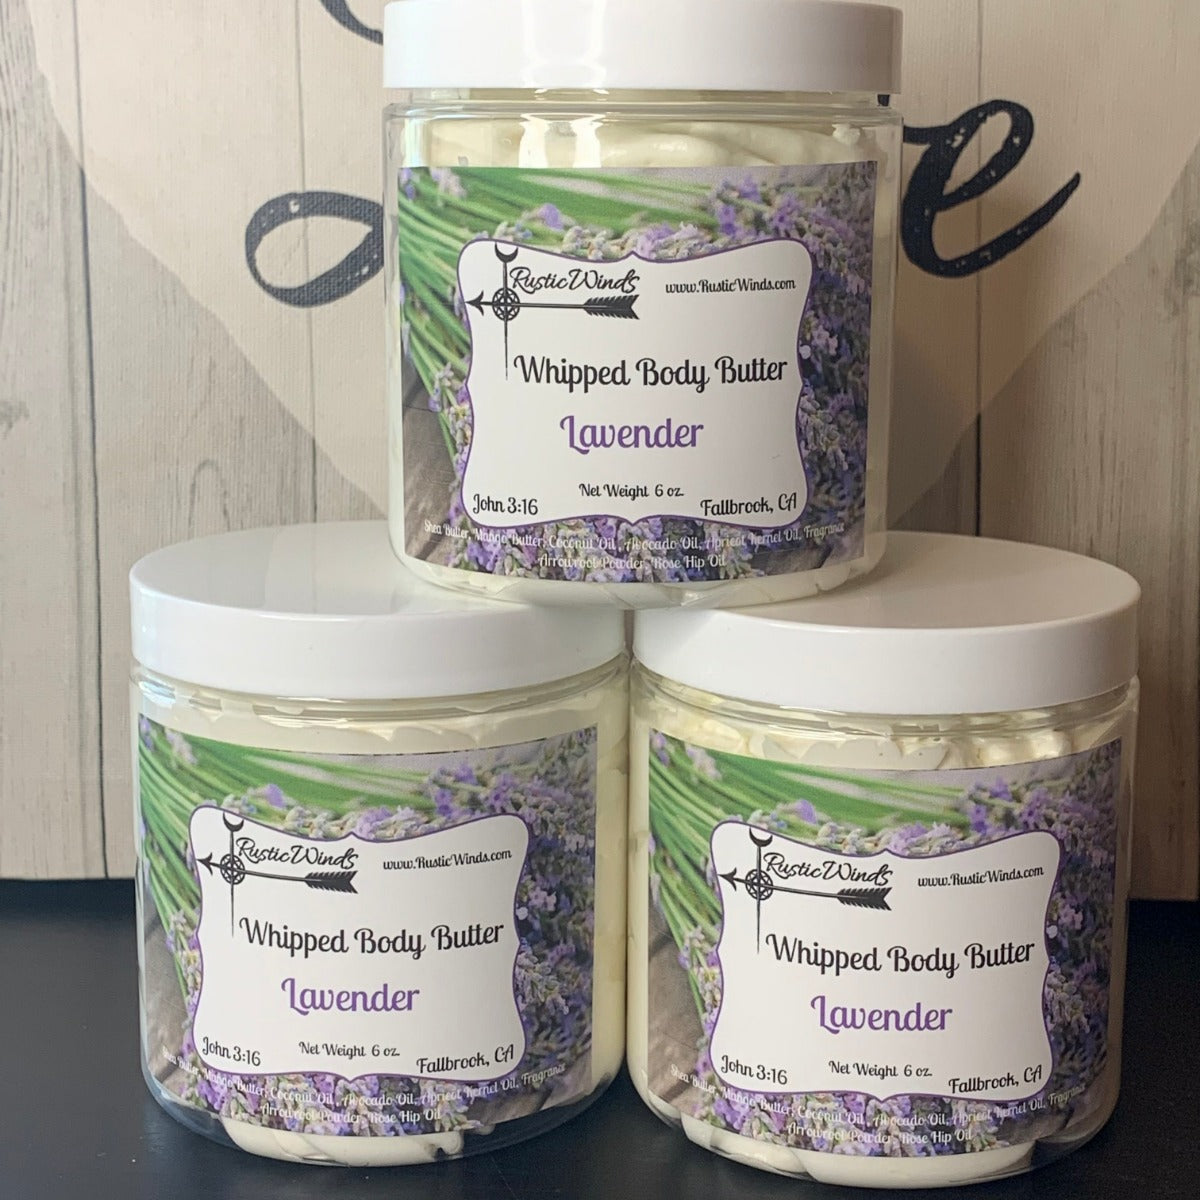 Whipped Body Butter - Lavender 4 oz